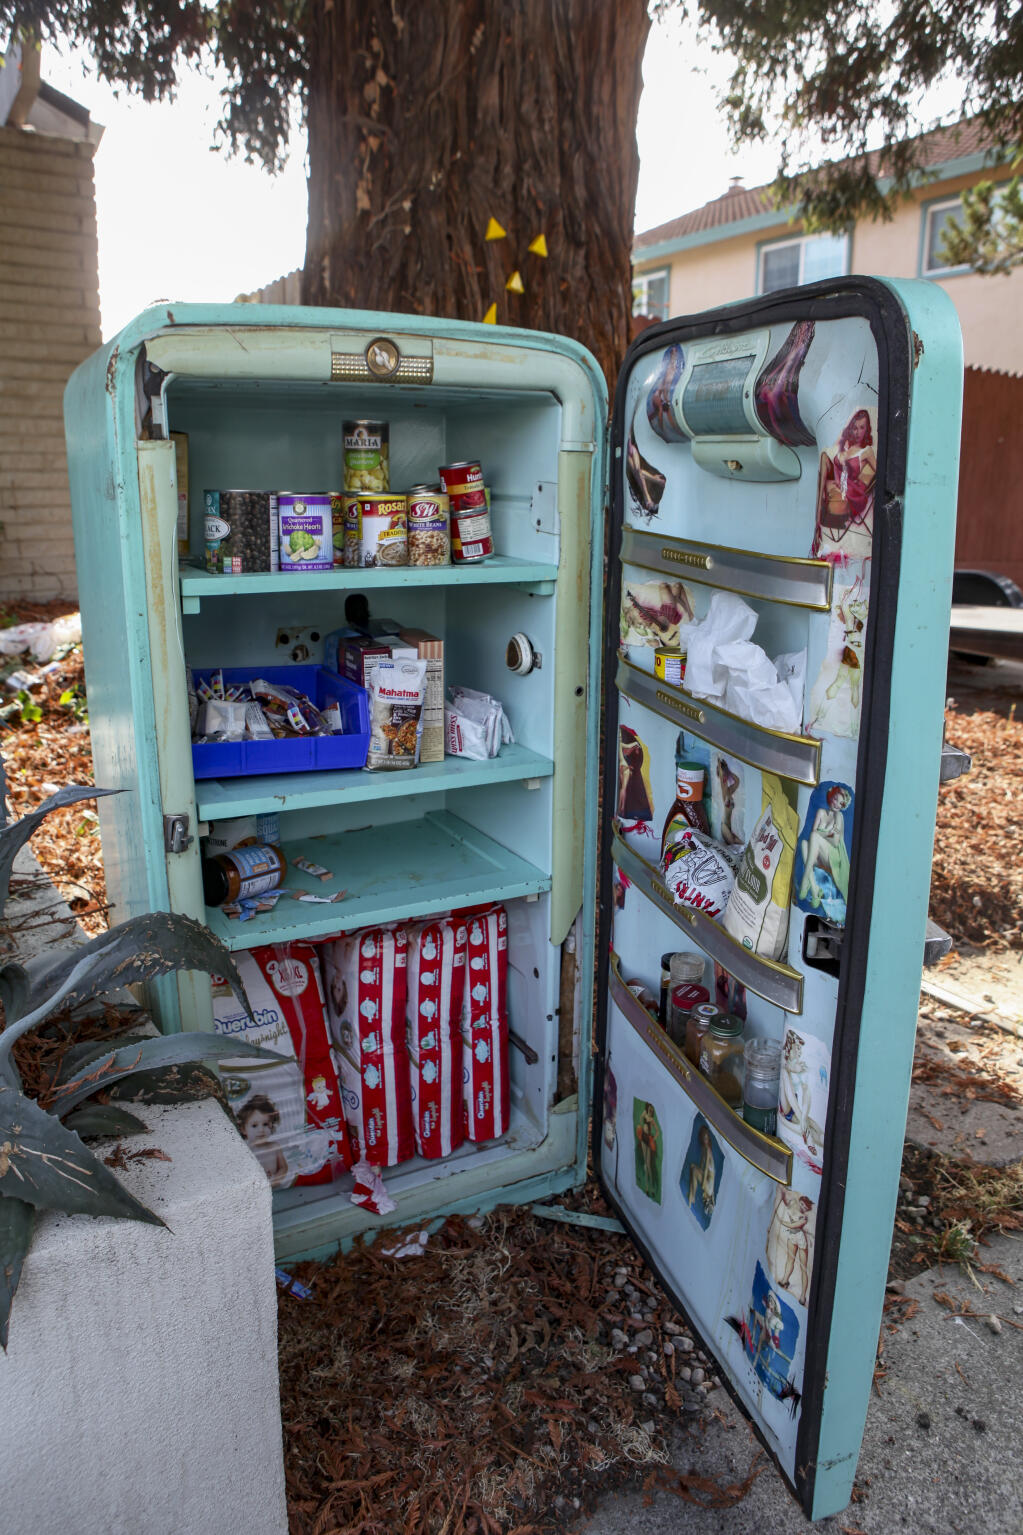 A little free library with pantry food items and diapers is located at 2012 Sultana Drive inside an old refrigerator. (CRISSY PASCUAL/ARGUS-COURIER STAFF)